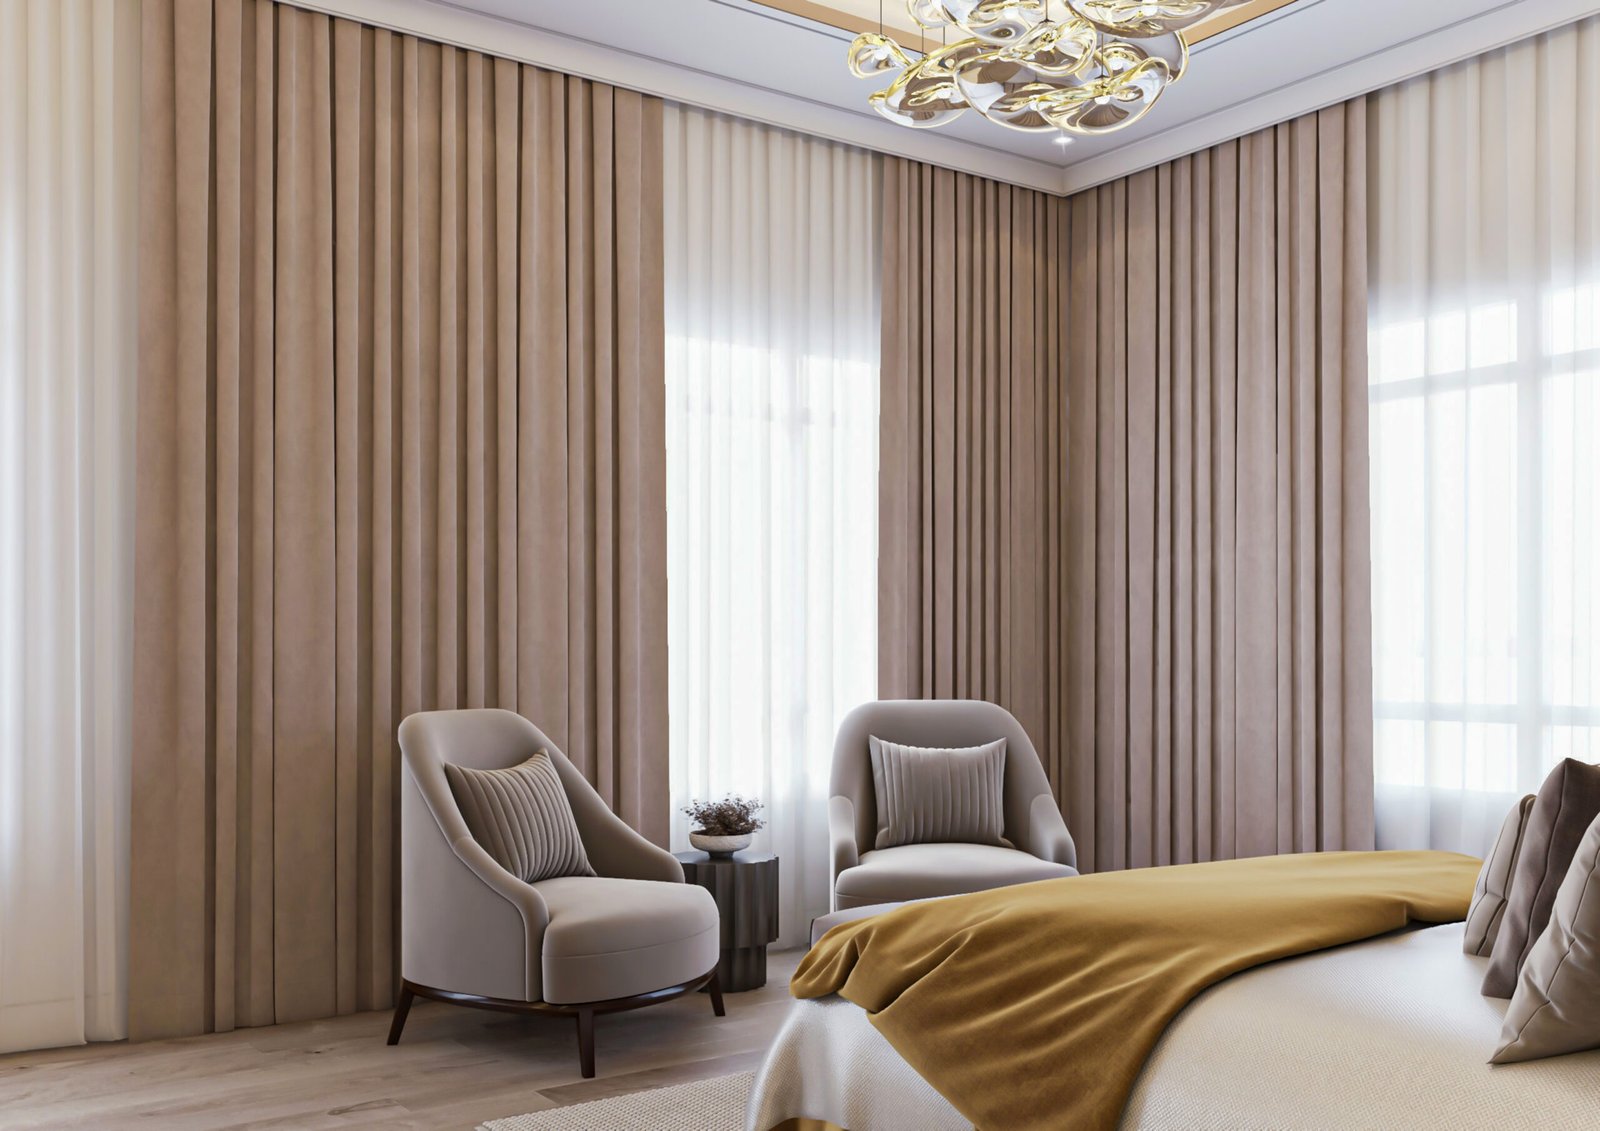 Ceiling Mounted Curtain Rods